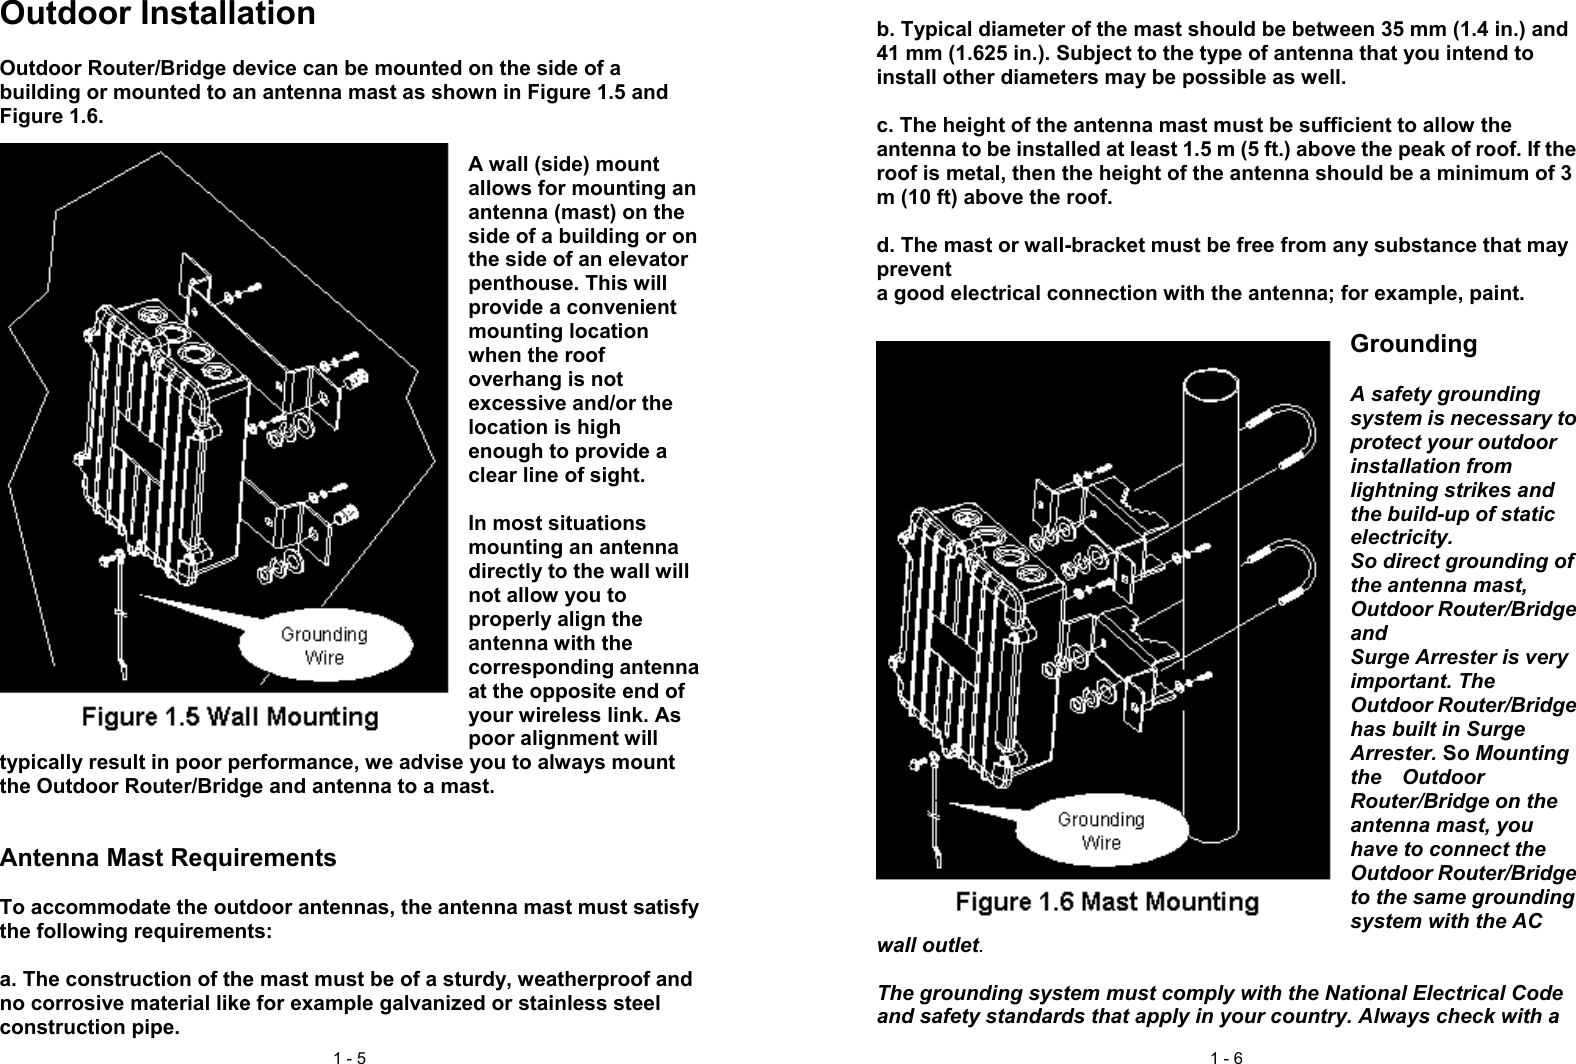 1 - 5Outdoor InstallationOutdoor Router/Bridge device can be mounted on the side of abuilding or mounted to an antenna mast as shown in Figure 1.5 andFigure 1.6.A wall (side) mountallows for mounting anantenna (mast) on theside of a building or onthe side of an elevatorpenthouse. This willprovide a convenientmounting locationwhen the roofoverhang is notexcessive and/or thelocation is highenough to provide aclear line of sight.In most situationsmounting an antennadirectly to the wall willnot allow you toproperly align theantenna with thecorresponding antennaat the opposite end ofyour wireless link. Aspoor alignment willtypically result in poor performance, we advise you to always mountthe Outdoor Router/Bridge and antenna to a mast.Antenna Mast RequirementsTo accommodate the outdoor antennas, the antenna mast must satisfythe following requirements:a. The construction of the mast must be of a sturdy, weatherproof andno corrosive material like for example galvanized or stainless steelconstruction pipe.1 - 6b. Typical diameter of the mast should be between 35 mm (1.4 in.) and41 mm (1.625 in.). Subject to the type of antenna that you intend toinstall other diameters may be possible as well.c. The height of the antenna mast must be sufficient to allow theantenna to be installed at least 1.5 m (5 ft.) above the peak of roof. If theroof is metal, then the height of the antenna should be a minimum of 3m (10 ft) above the roof.d. The mast or wall-bracket must be free from any substance that maypreventa good electrical connection with the antenna; for example, paint.GroundingA safety groundingsystem is necessary toprotect your outdoorinstallation fromlightning strikes andthe build-up of staticelectricity.So direct grounding ofthe antenna mast,Outdoor Router/BridgeandSurge Arrester is veryimportant. TheOutdoor Router/Bridgehas built in SurgeArrester. So Mountingthe  OutdoorRouter/Bridge on theantenna mast, youhave to connect theOutdoor Router/Bridgeto the same groundingsystem with the ACwall outlet.The grounding system must comply with the National Electrical Codeand safety standards that apply in your country. Always check with a